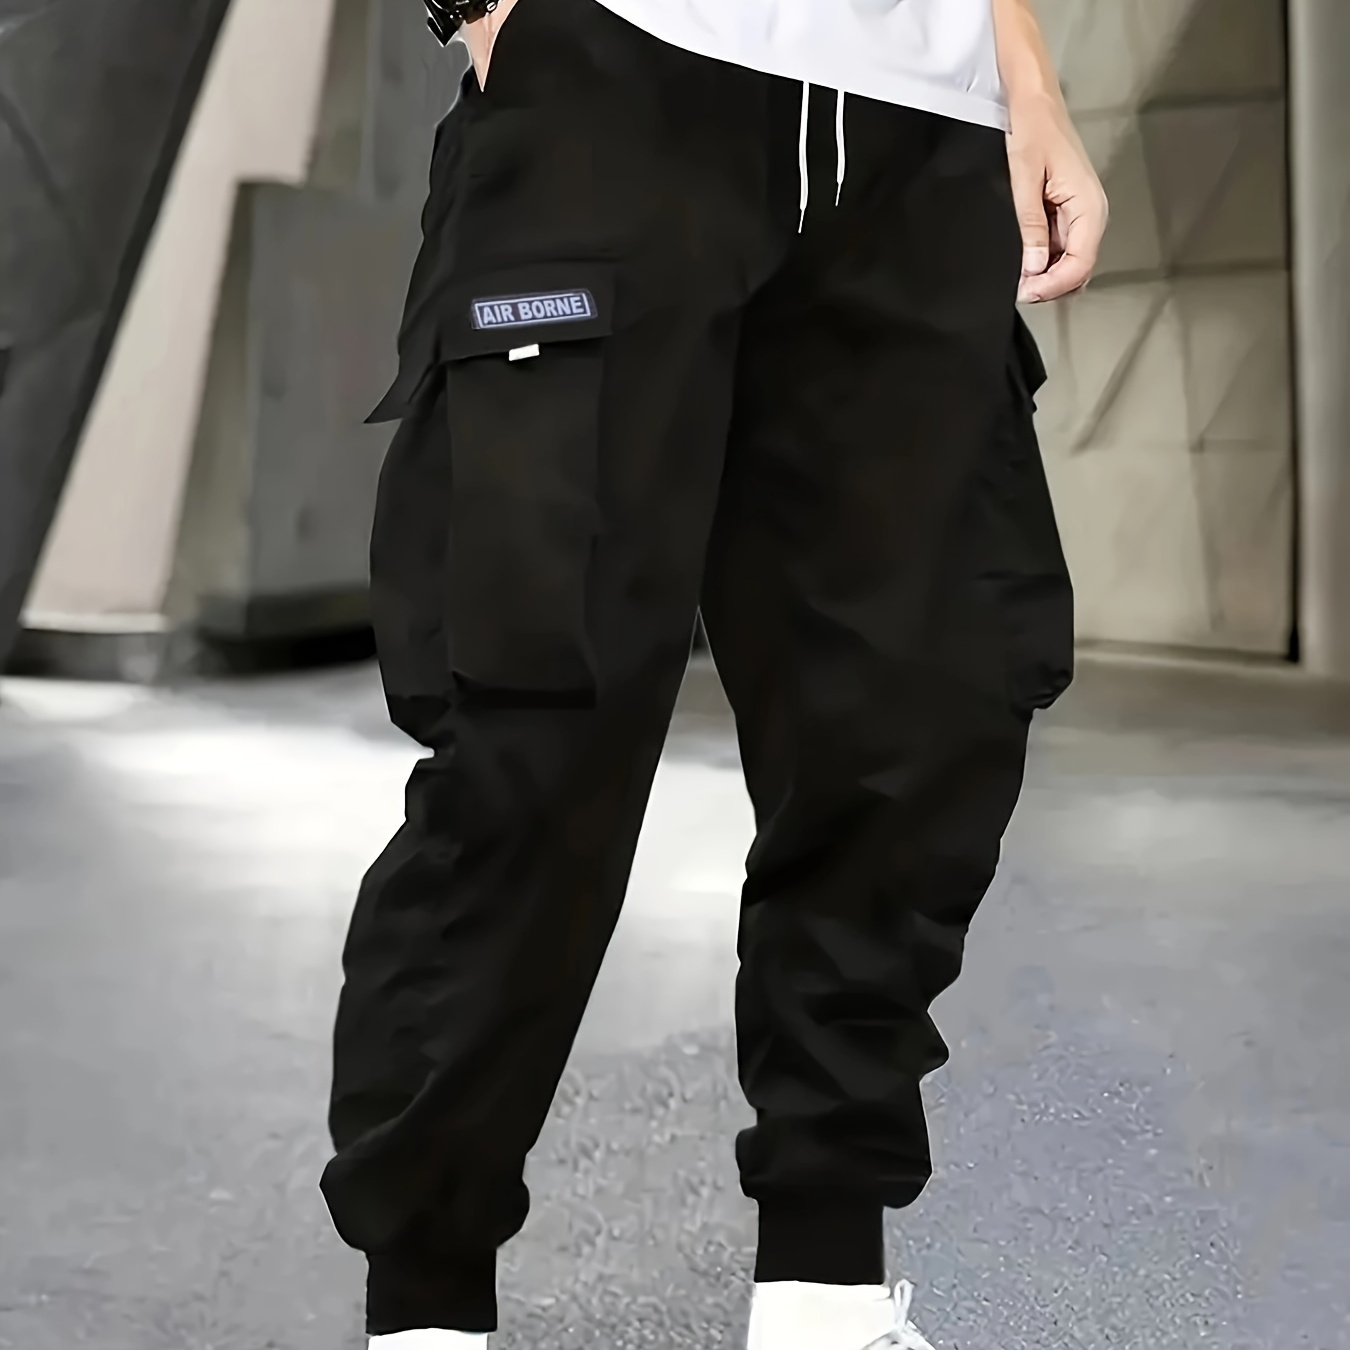 Plus Size Men's Casual Street Style Cargo Pants, Oversized Loose Fit Fashion Shorts With Pockets For Workout/outdoor, Men's Clothing